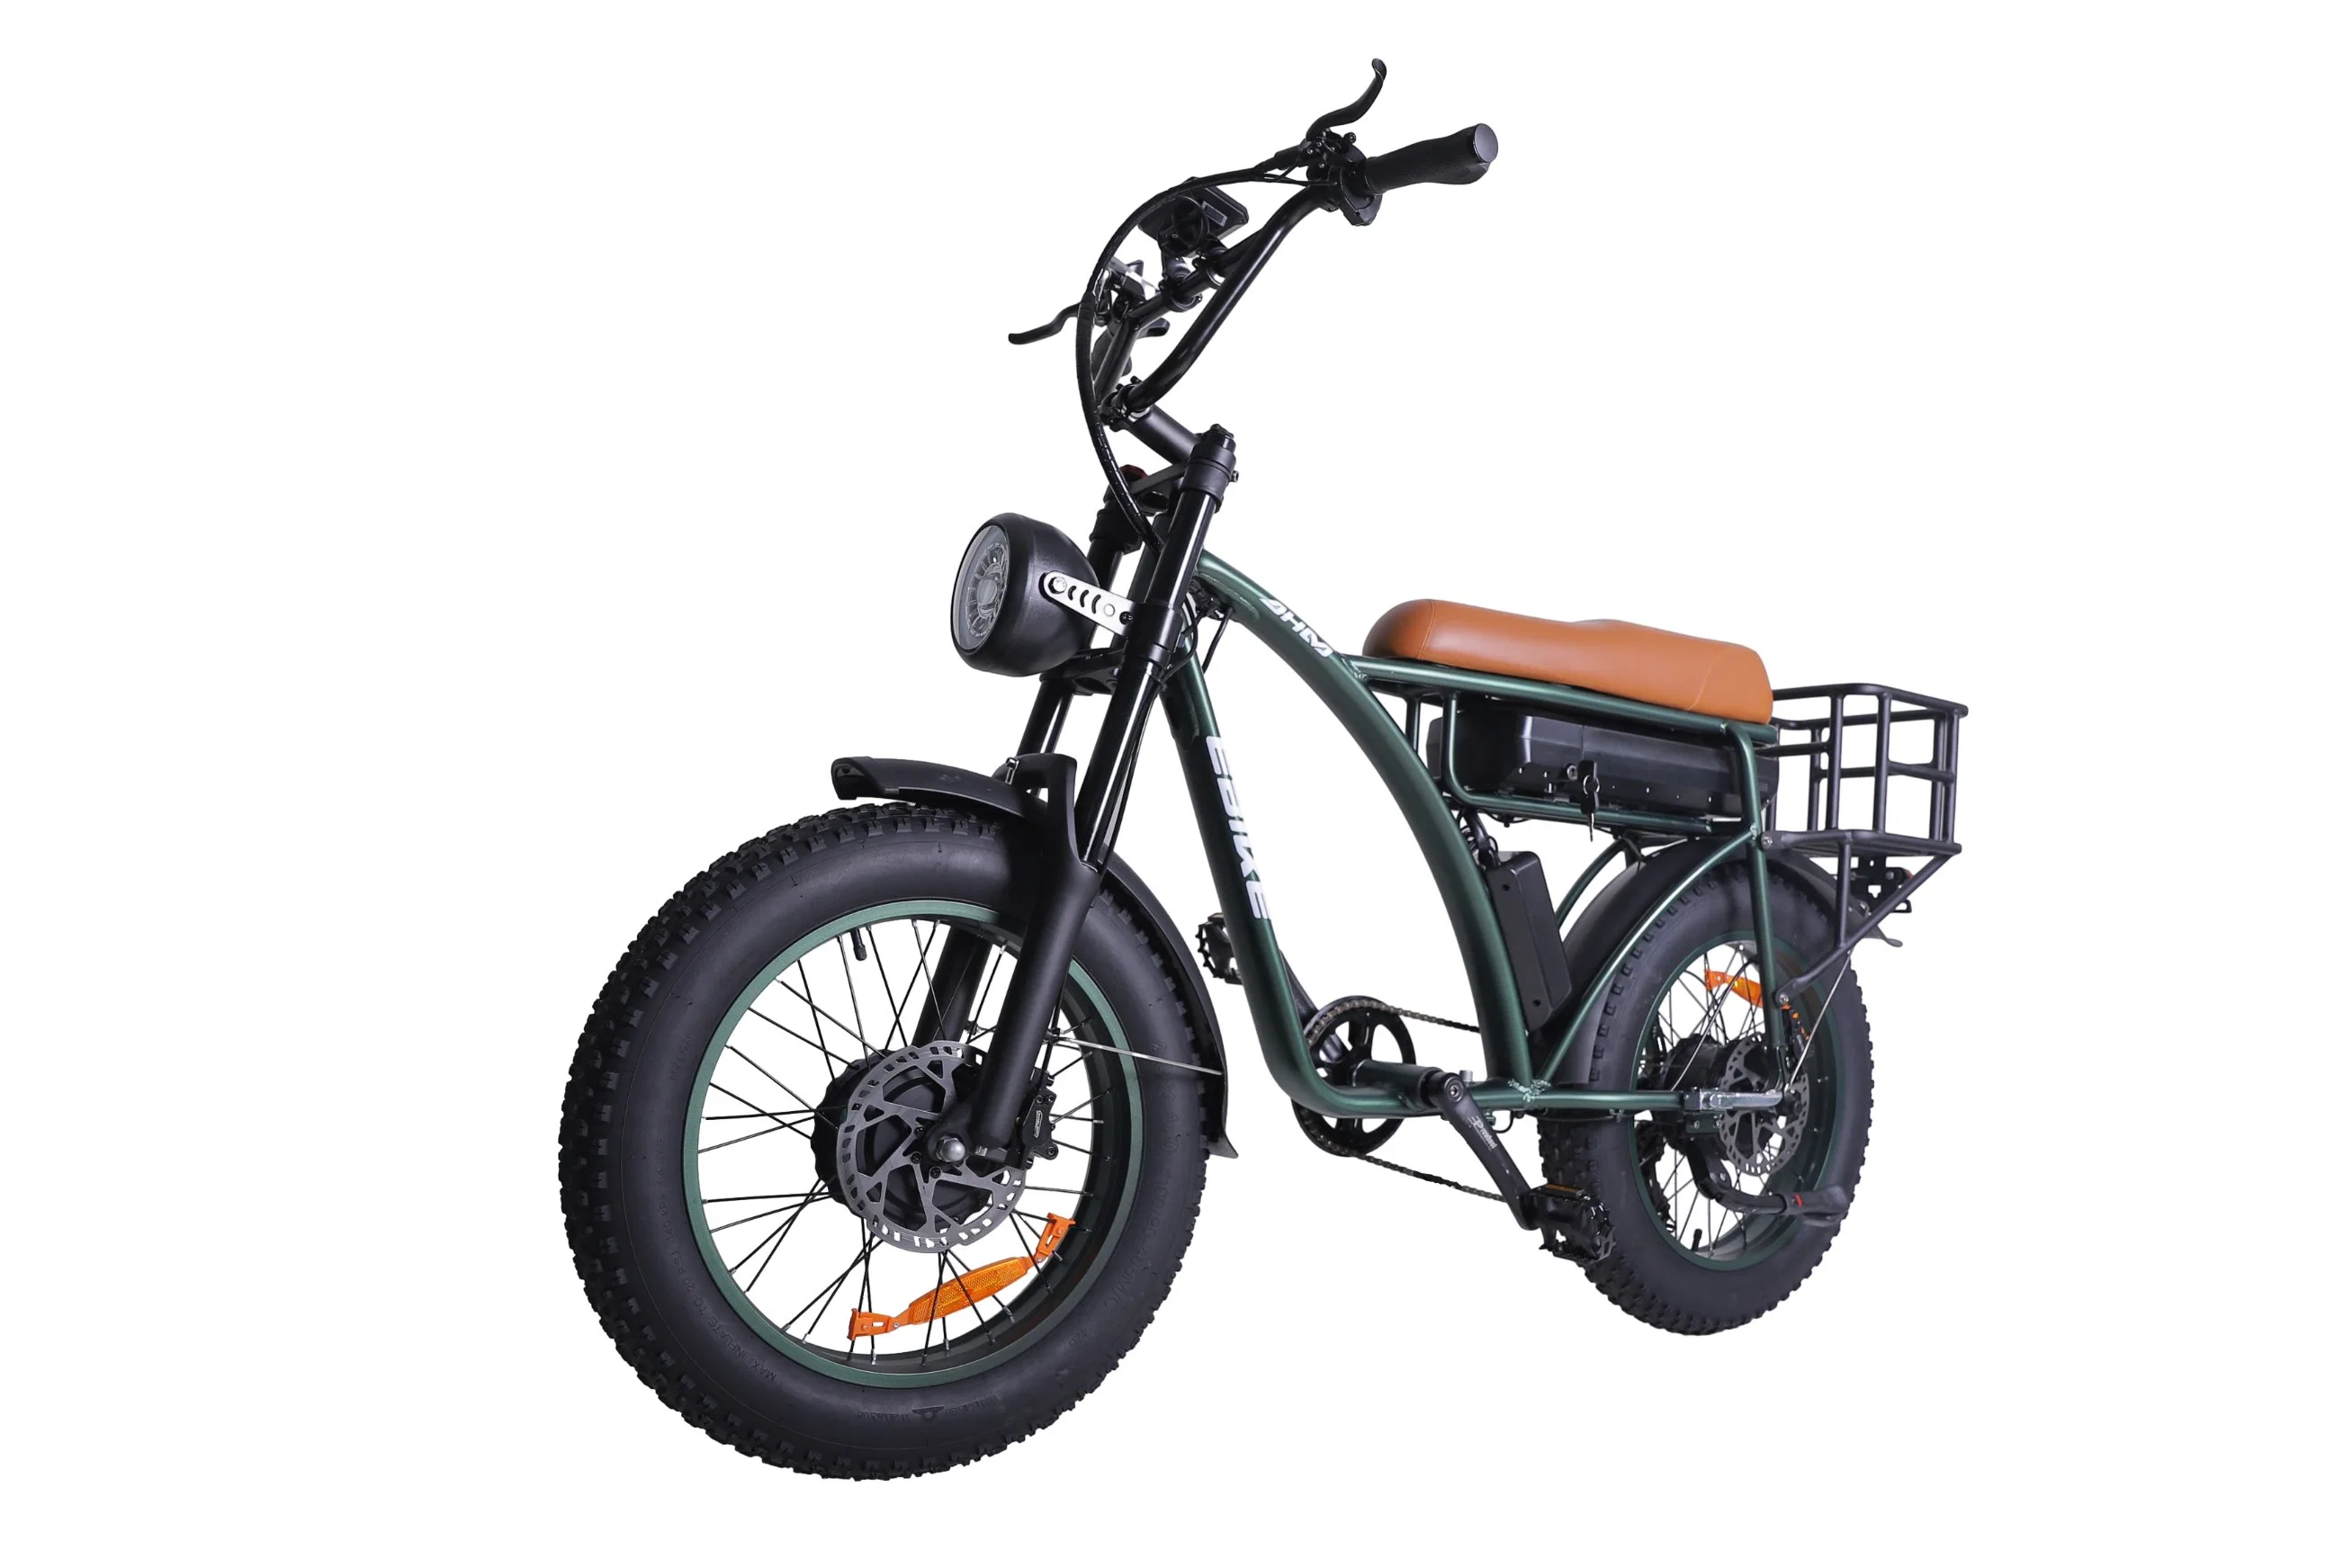 Fat Tire E Bike Dual 1000W Motor Electric Bike for an Ultimate Riding Experience Electric Bicycle, Electric Dirt Bike, Electric Vehicle Far Tire E Bike